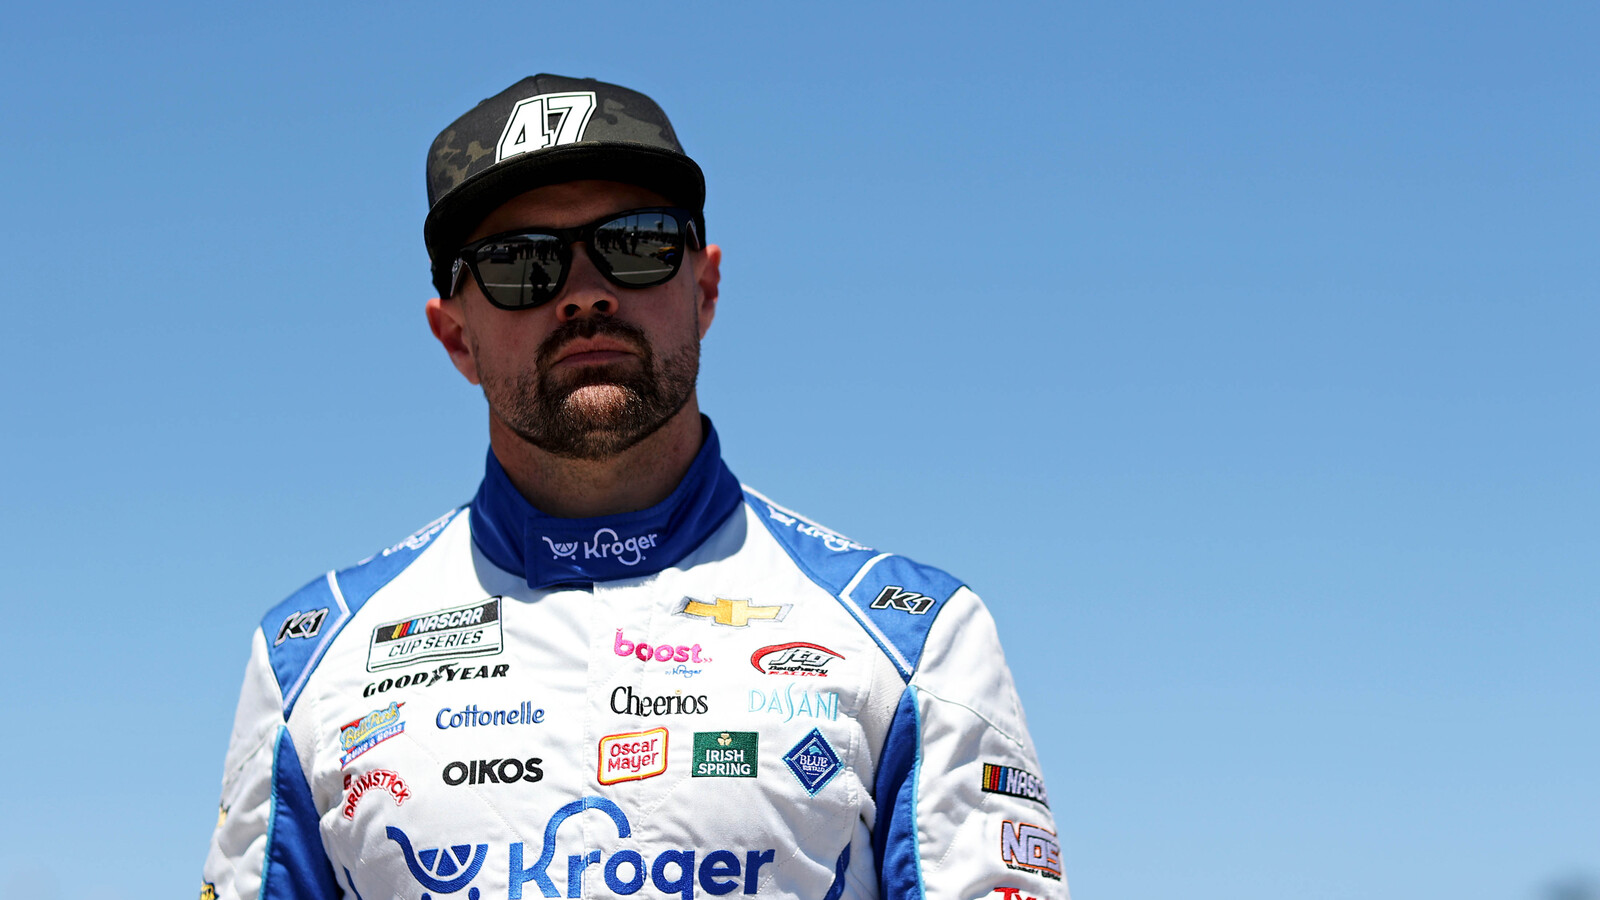 Ricky Stenhouse Jr. eviscerates Kyle Busch after fight: ‘He runs his mouth all the time’